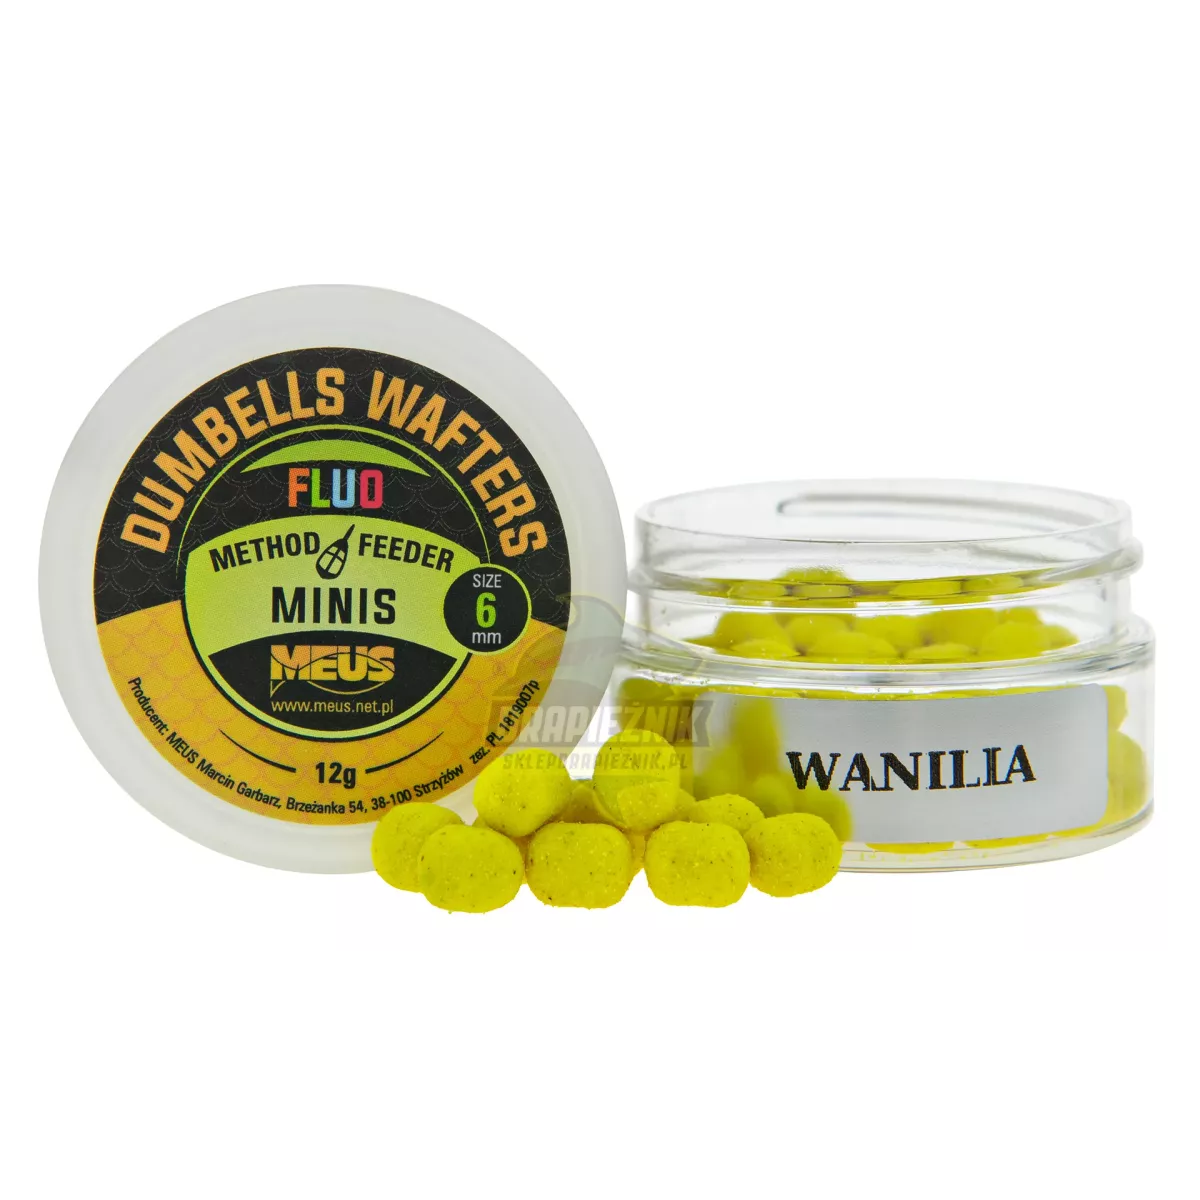 Waftersy MEUS Dumbells Wafters Fluo 6mm - Wanilia